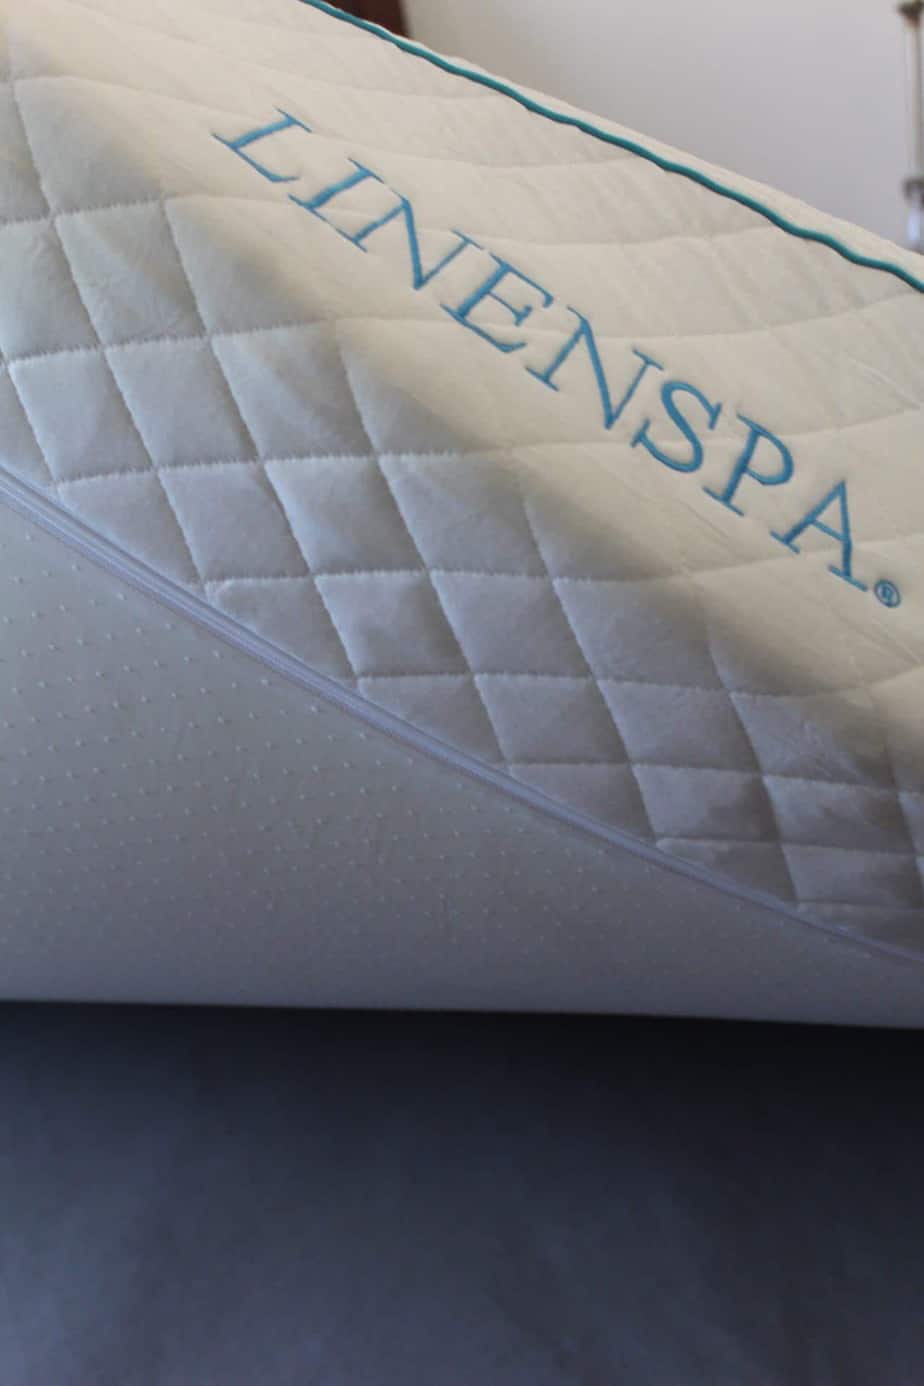 Have you tried the Linenspa foam mattress before? This review will answer many of your questions and give you an idea of what you can expect when you order the Linenspa 10" memory foam mattress. It's delivered right to your door and easy to set up. You'll love your new mattress and get a good nights rest.